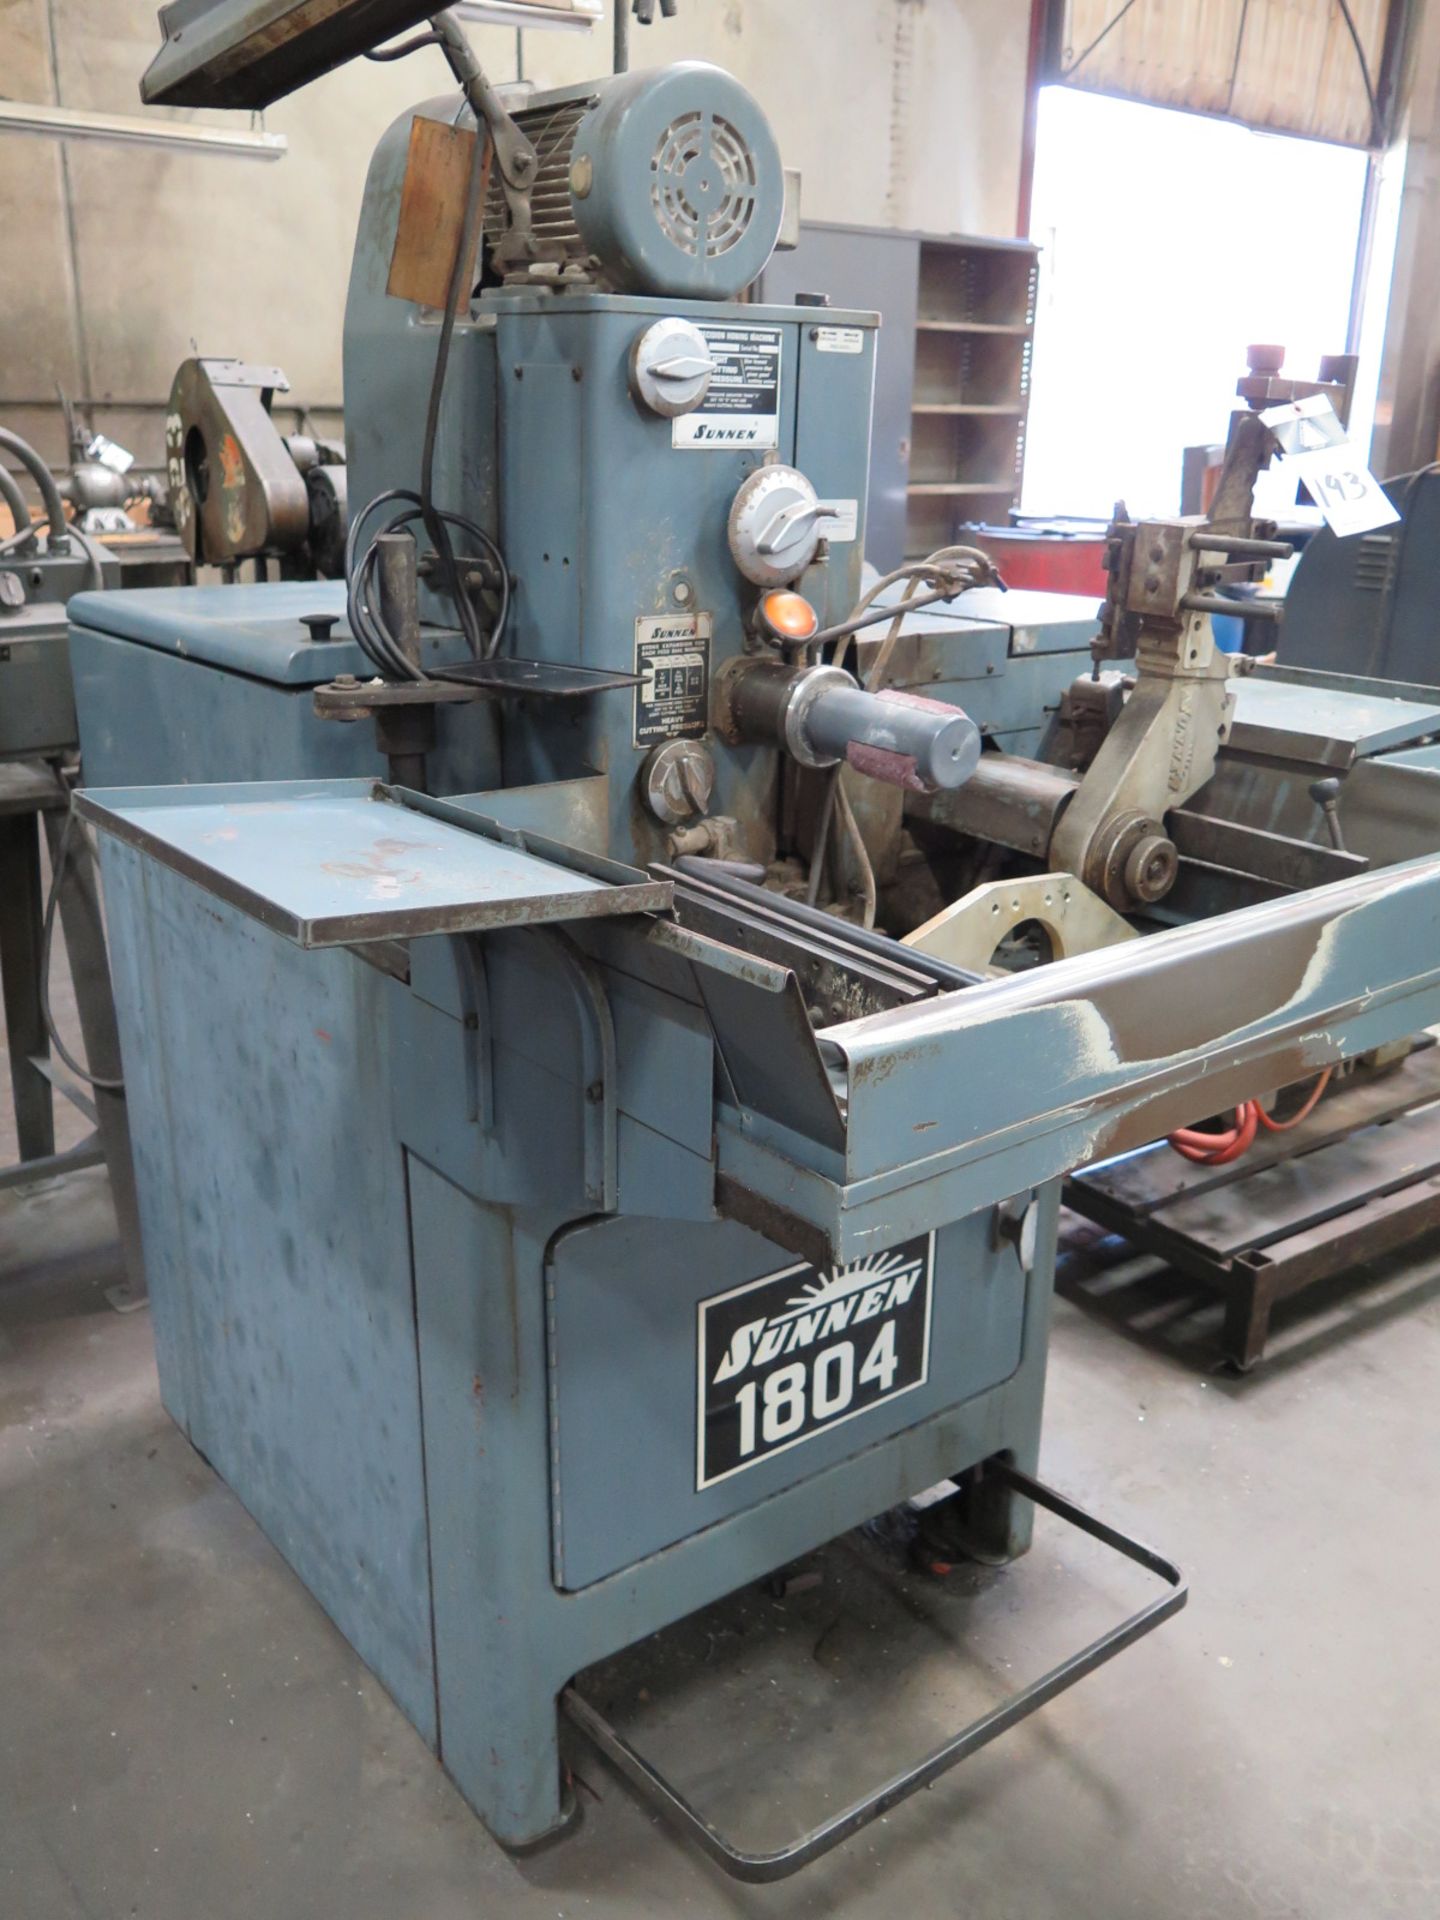 Sunnen mdl. MBC-1804 Precision Honing Machine s/n 84778 w/ Auto Stroking, Coolant - Image 2 of 4